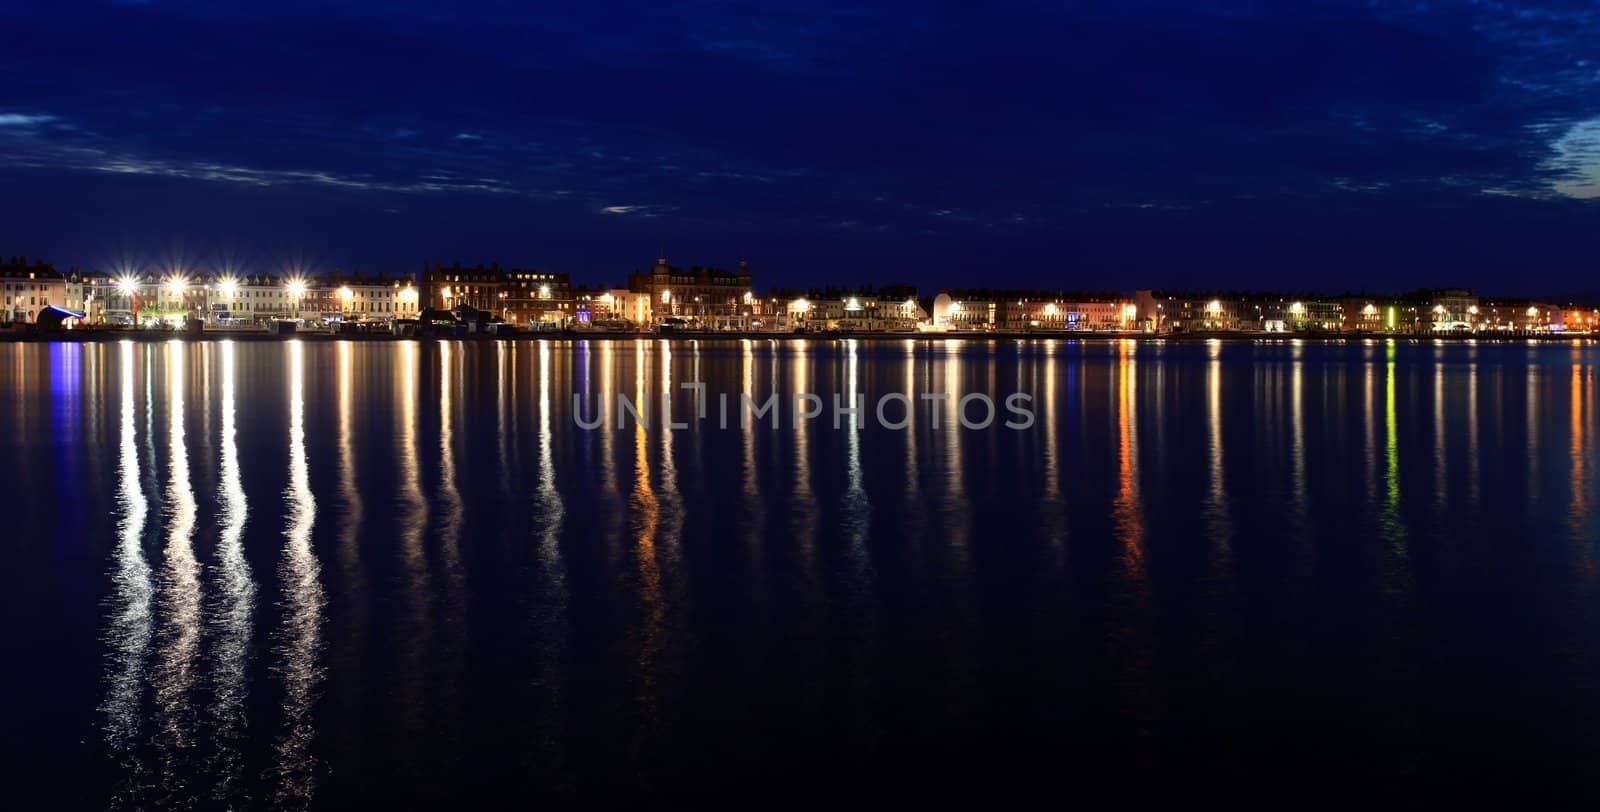 Weymouth seafront at dusk by olliemt